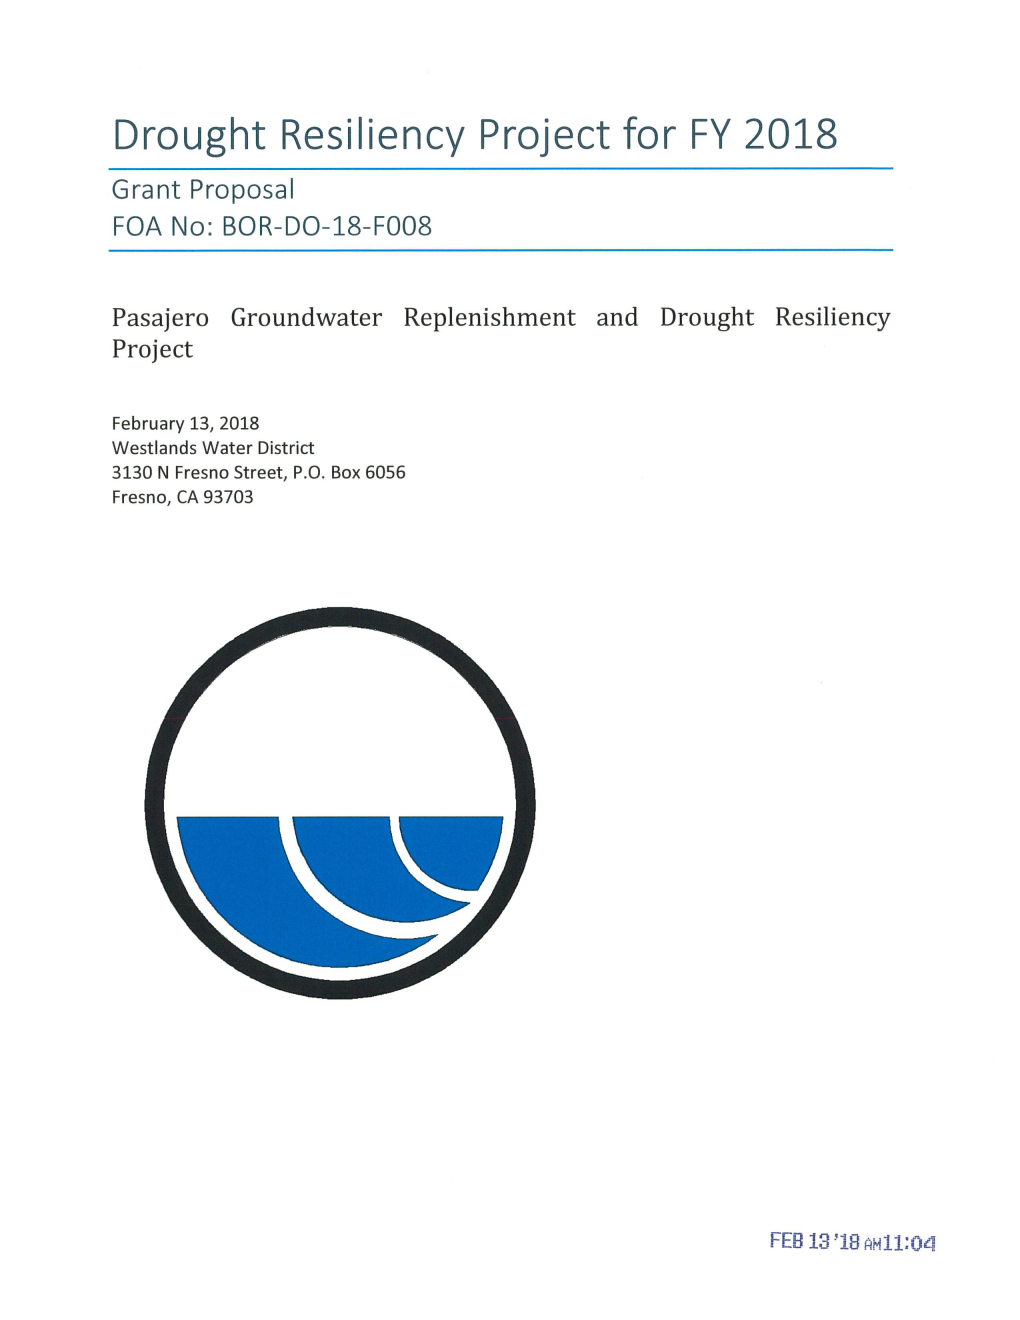 Pasajero Groundwater Replenishment and Drought Resiliency Project